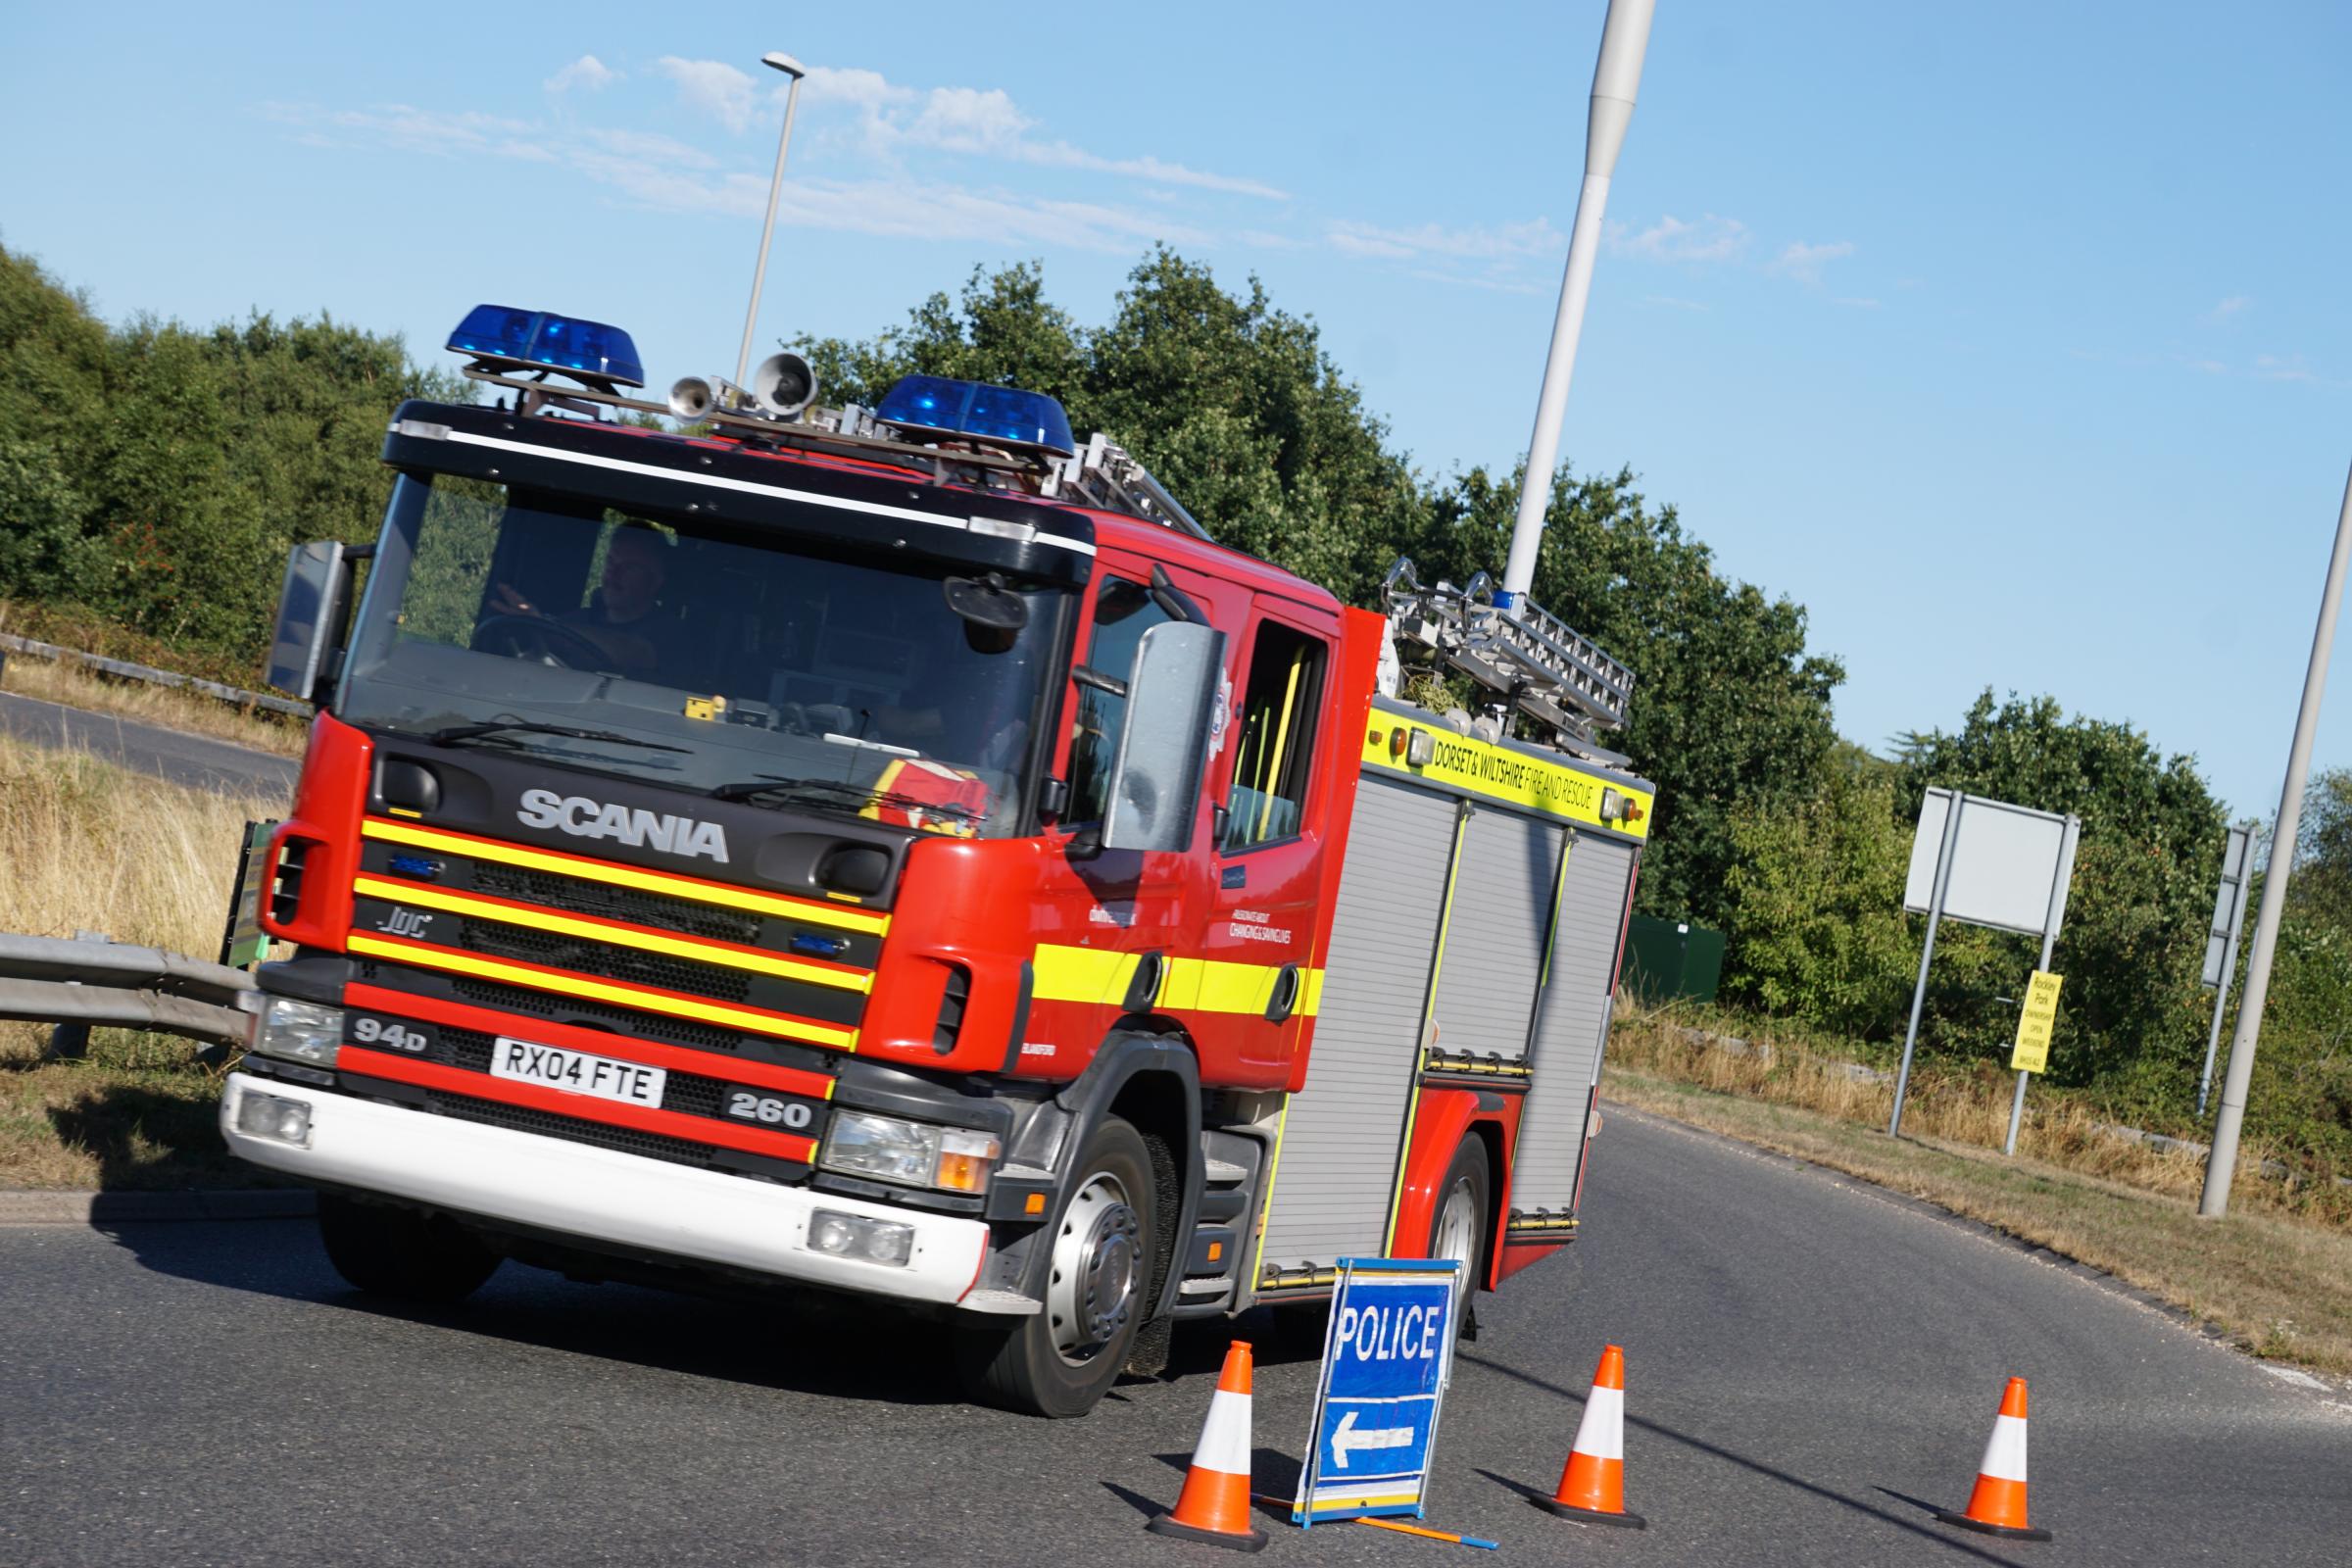 Emergency services working together to promote road safety message